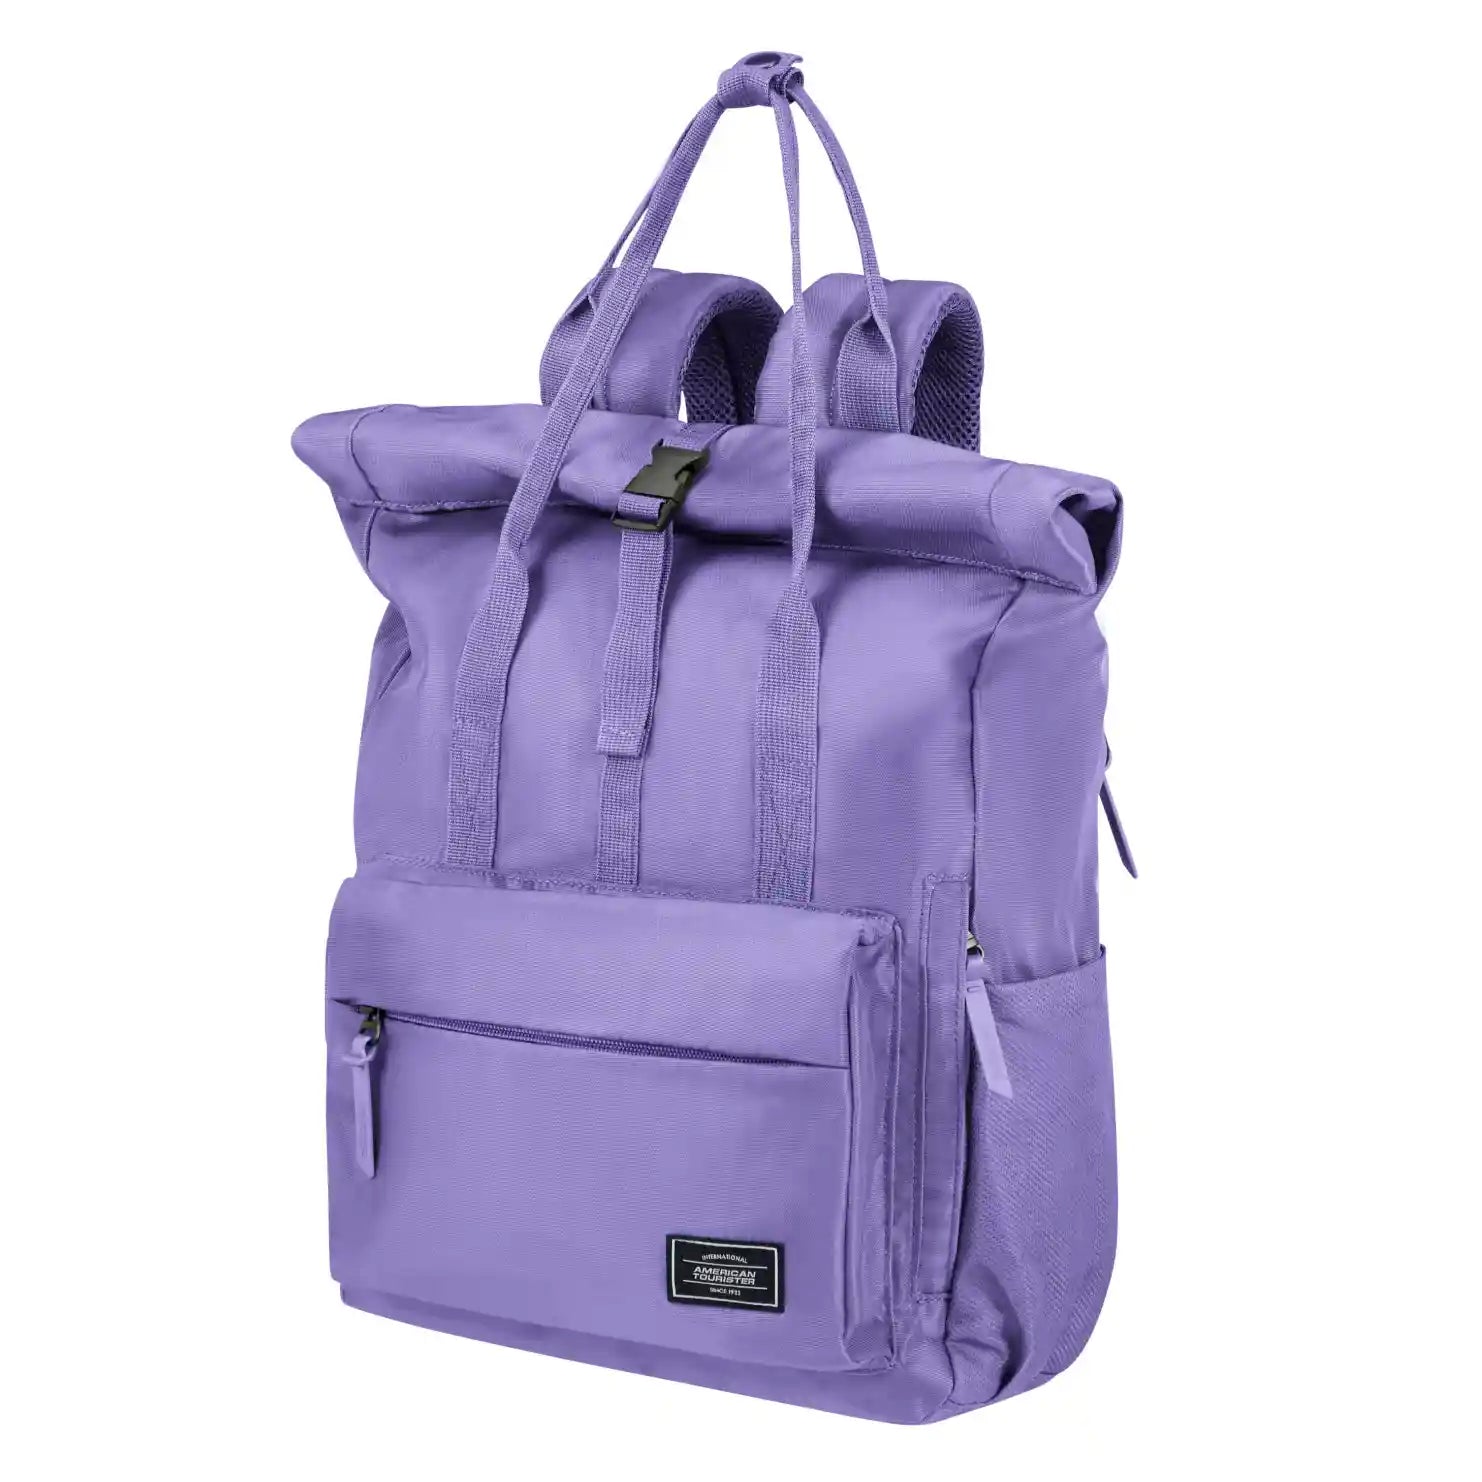 American Tourister Urban Groove Tote Backpack 43 cm - Soft Lilac